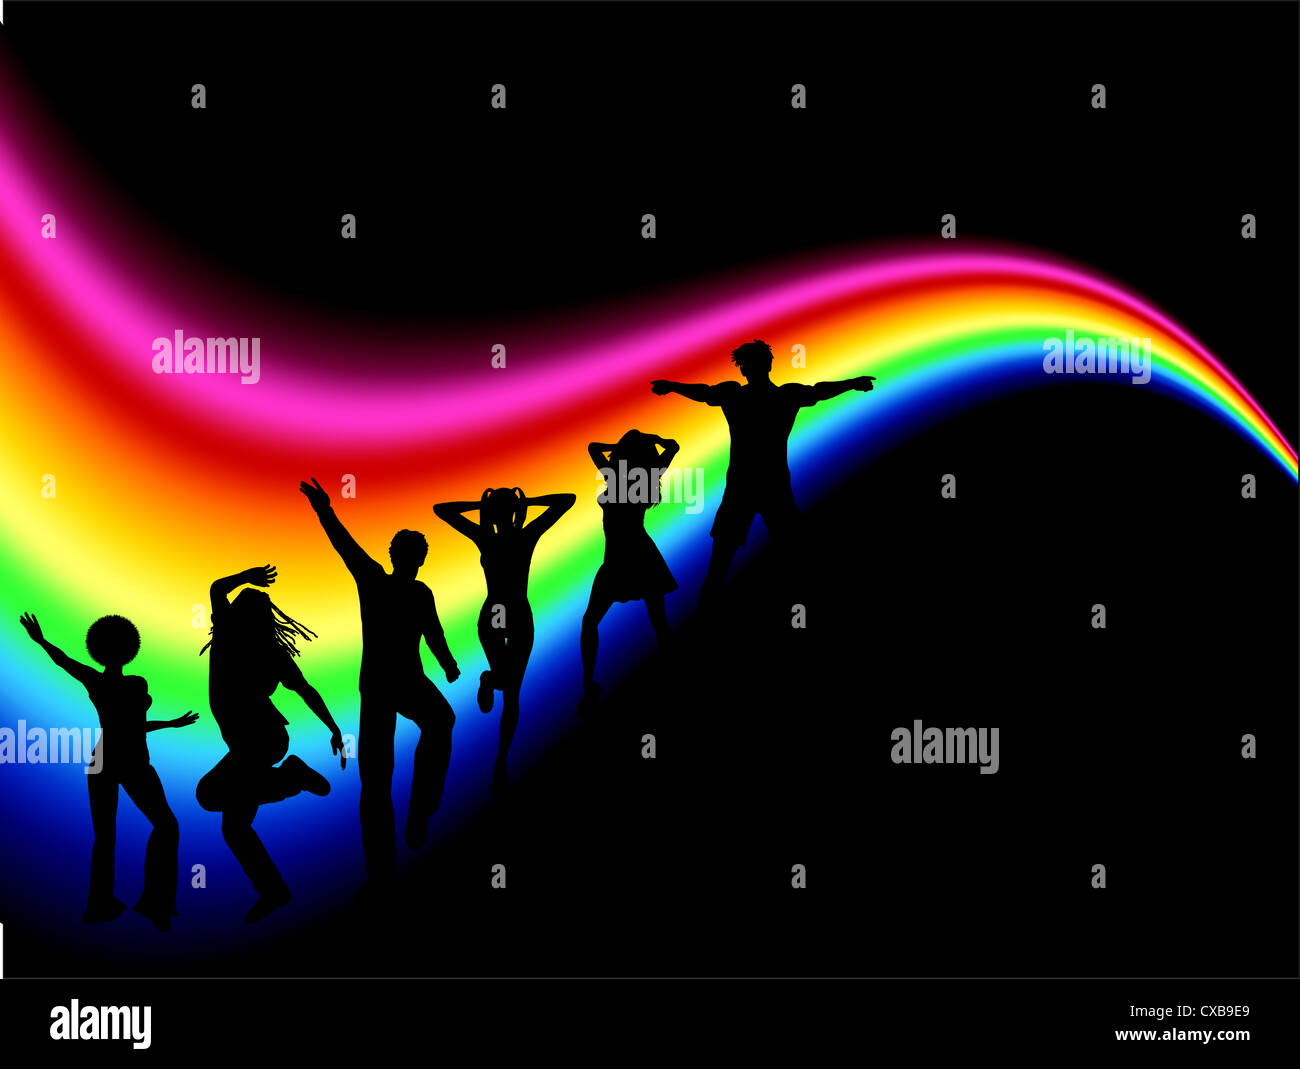 Silhouettes of funky people dancing on rainbow coloured background Stock Photo